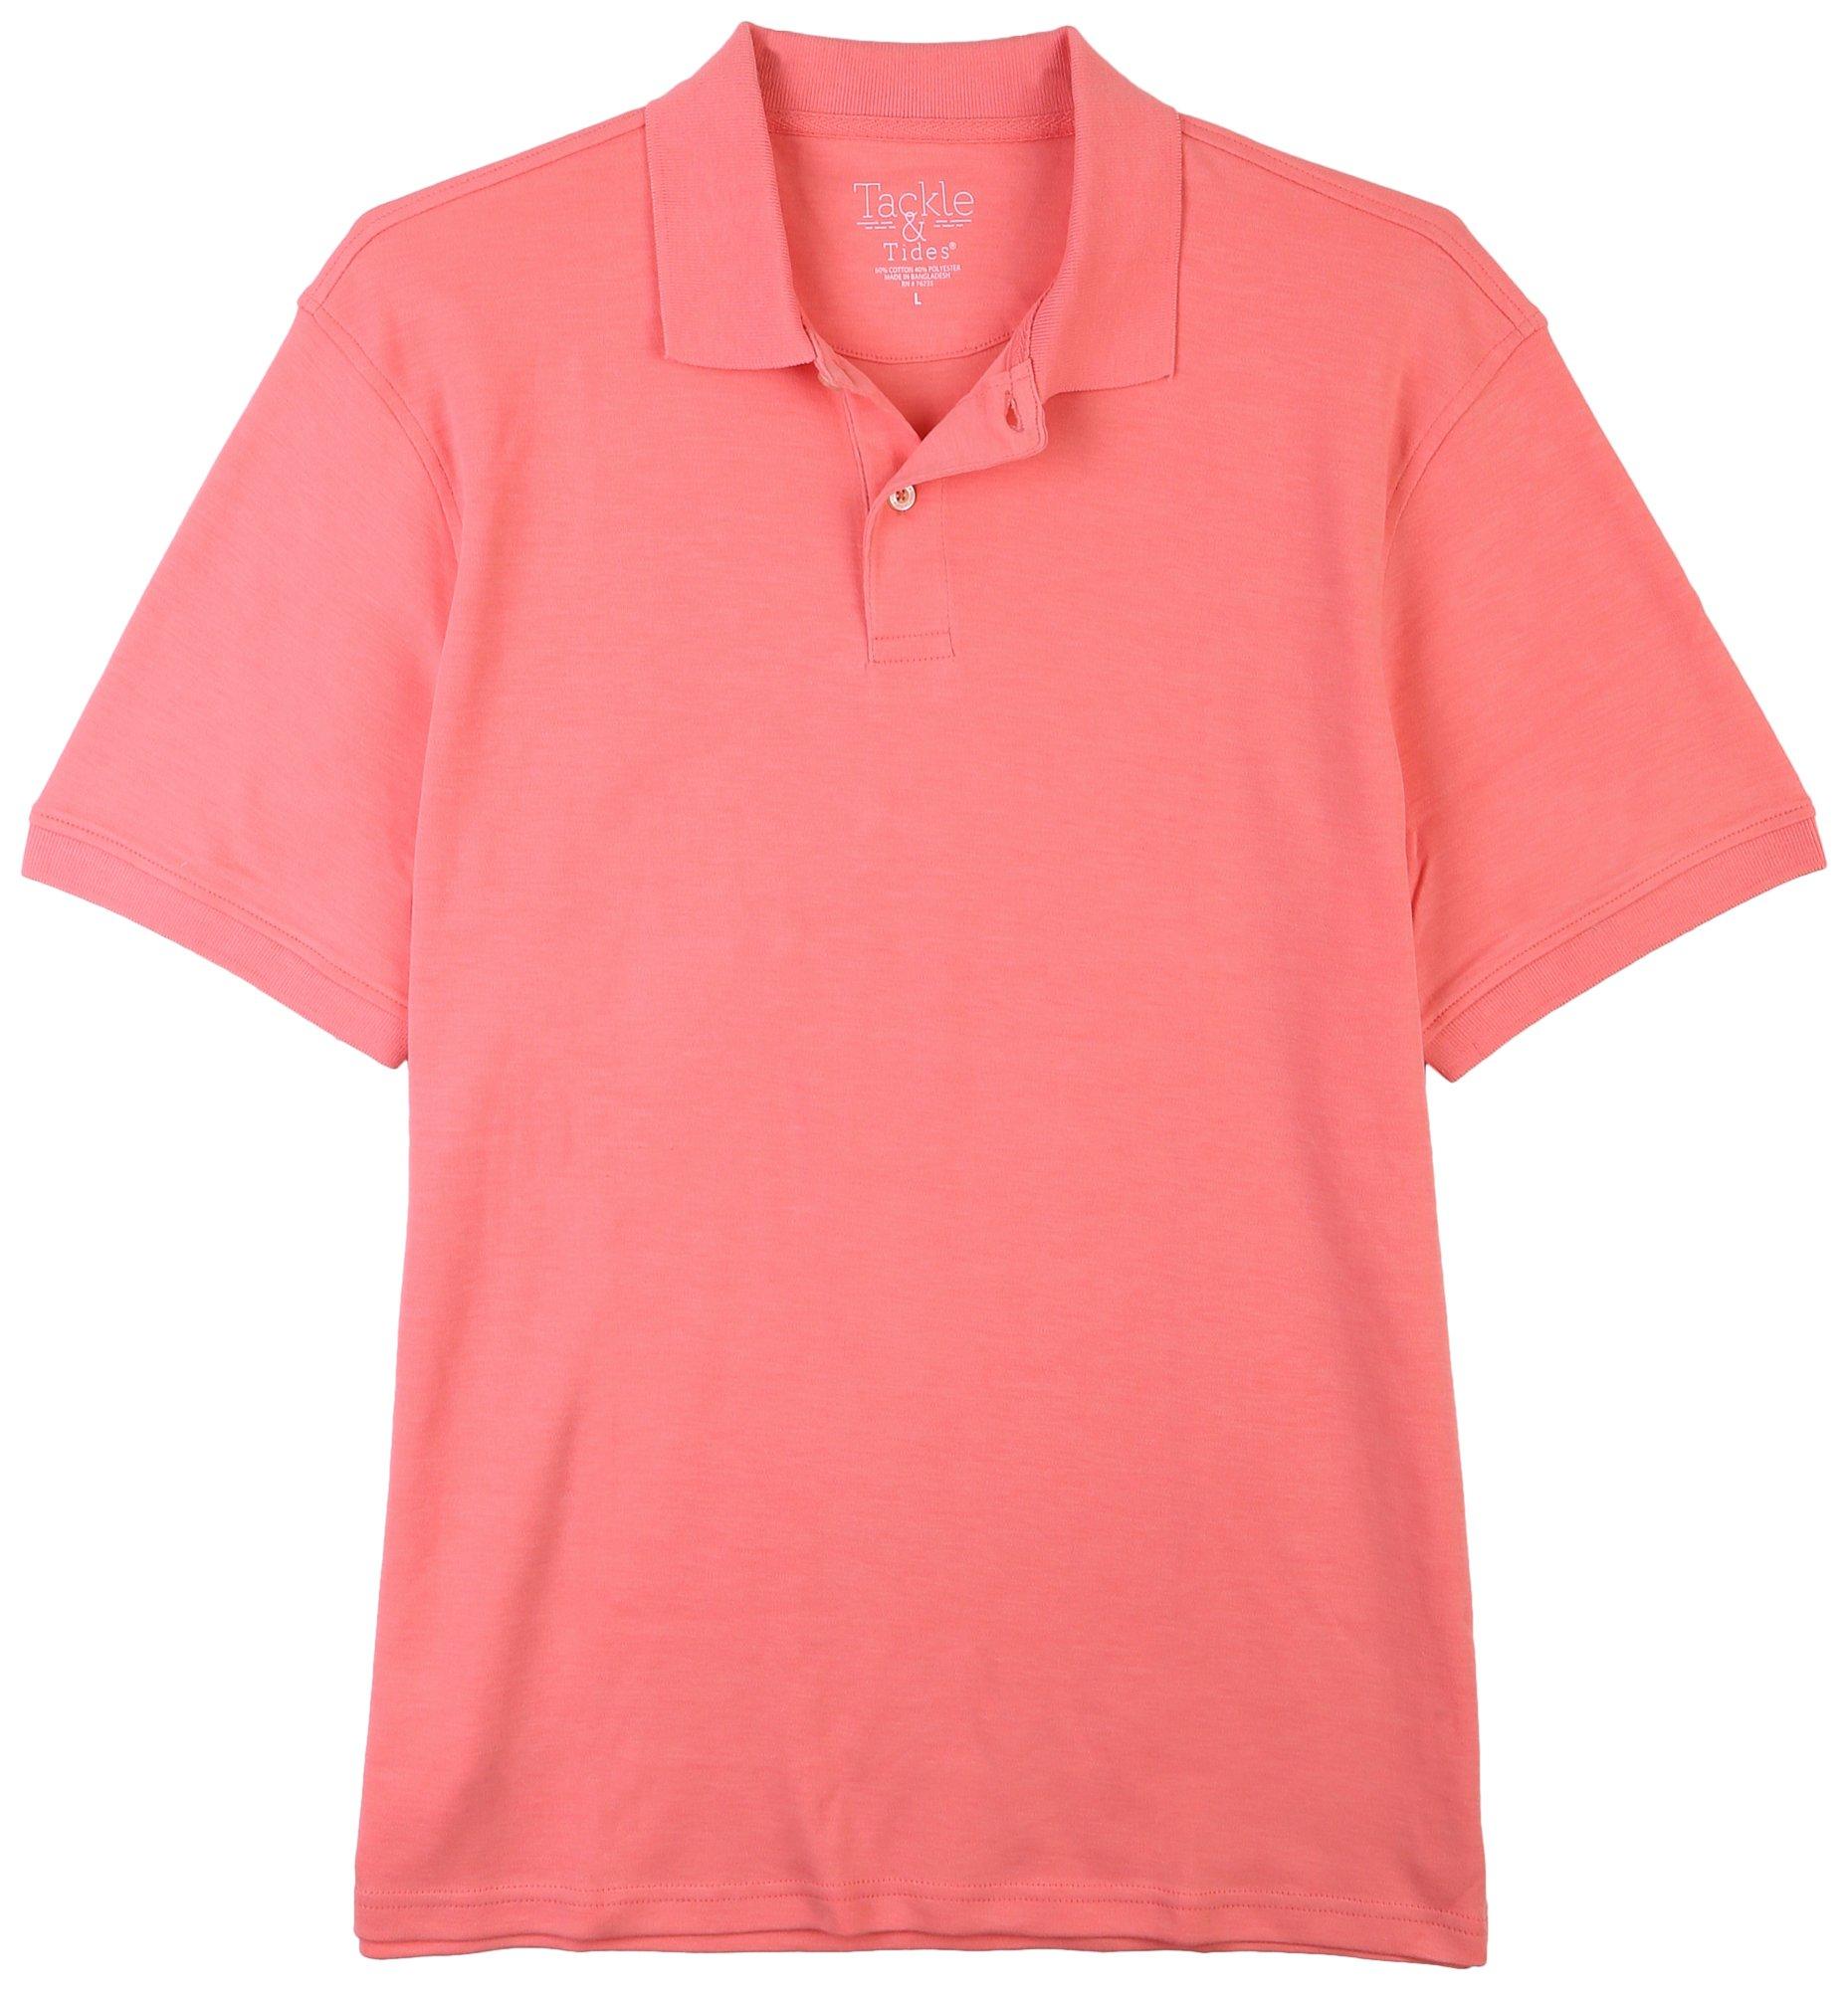 Mens Solid Short Sleeve Polo Top